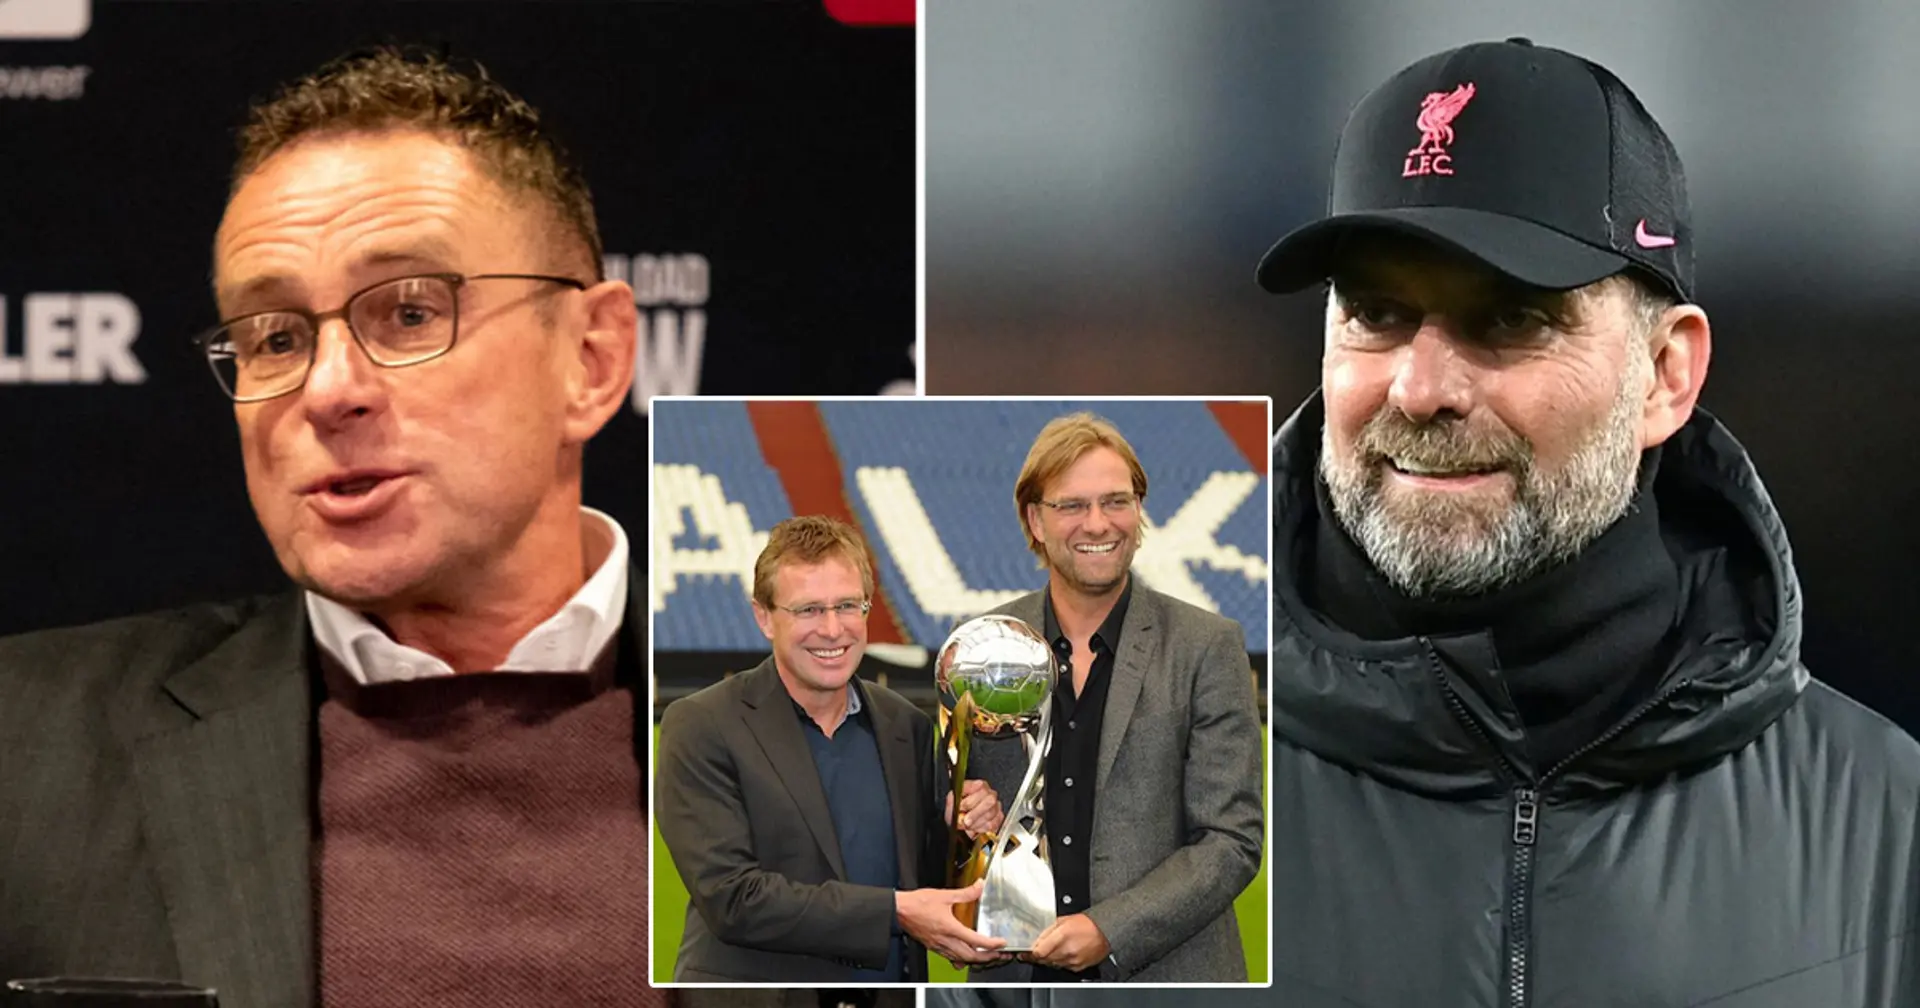 'In a way, I was his agent': Ralf Rangnick opens up on unusual relationship with Jurgen Klopp